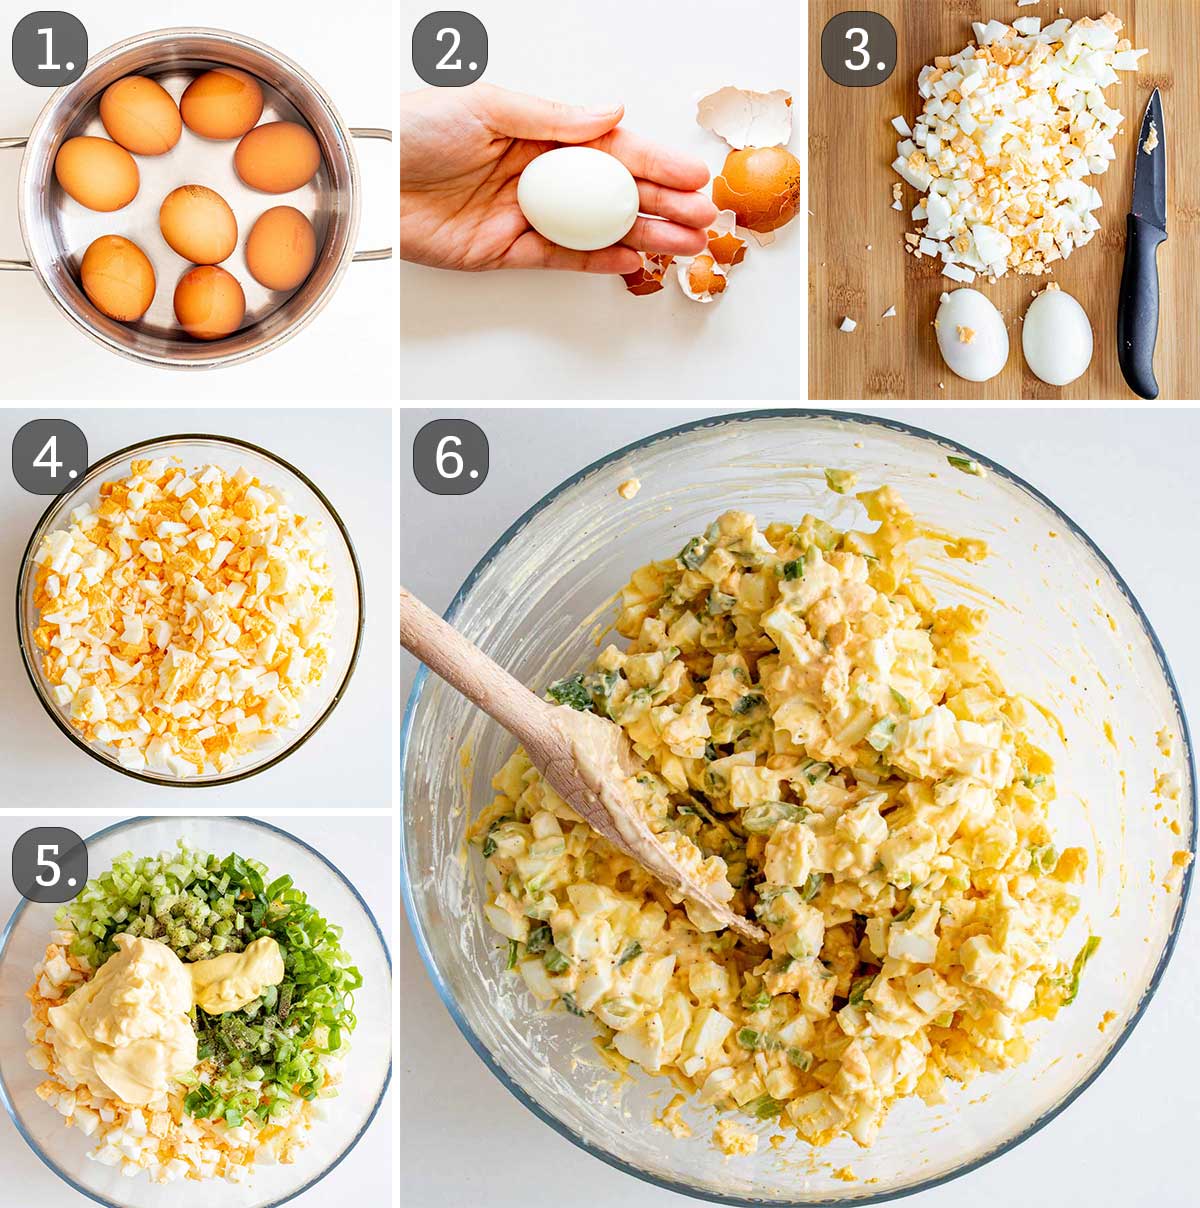 process shots showing how to make egg salad.